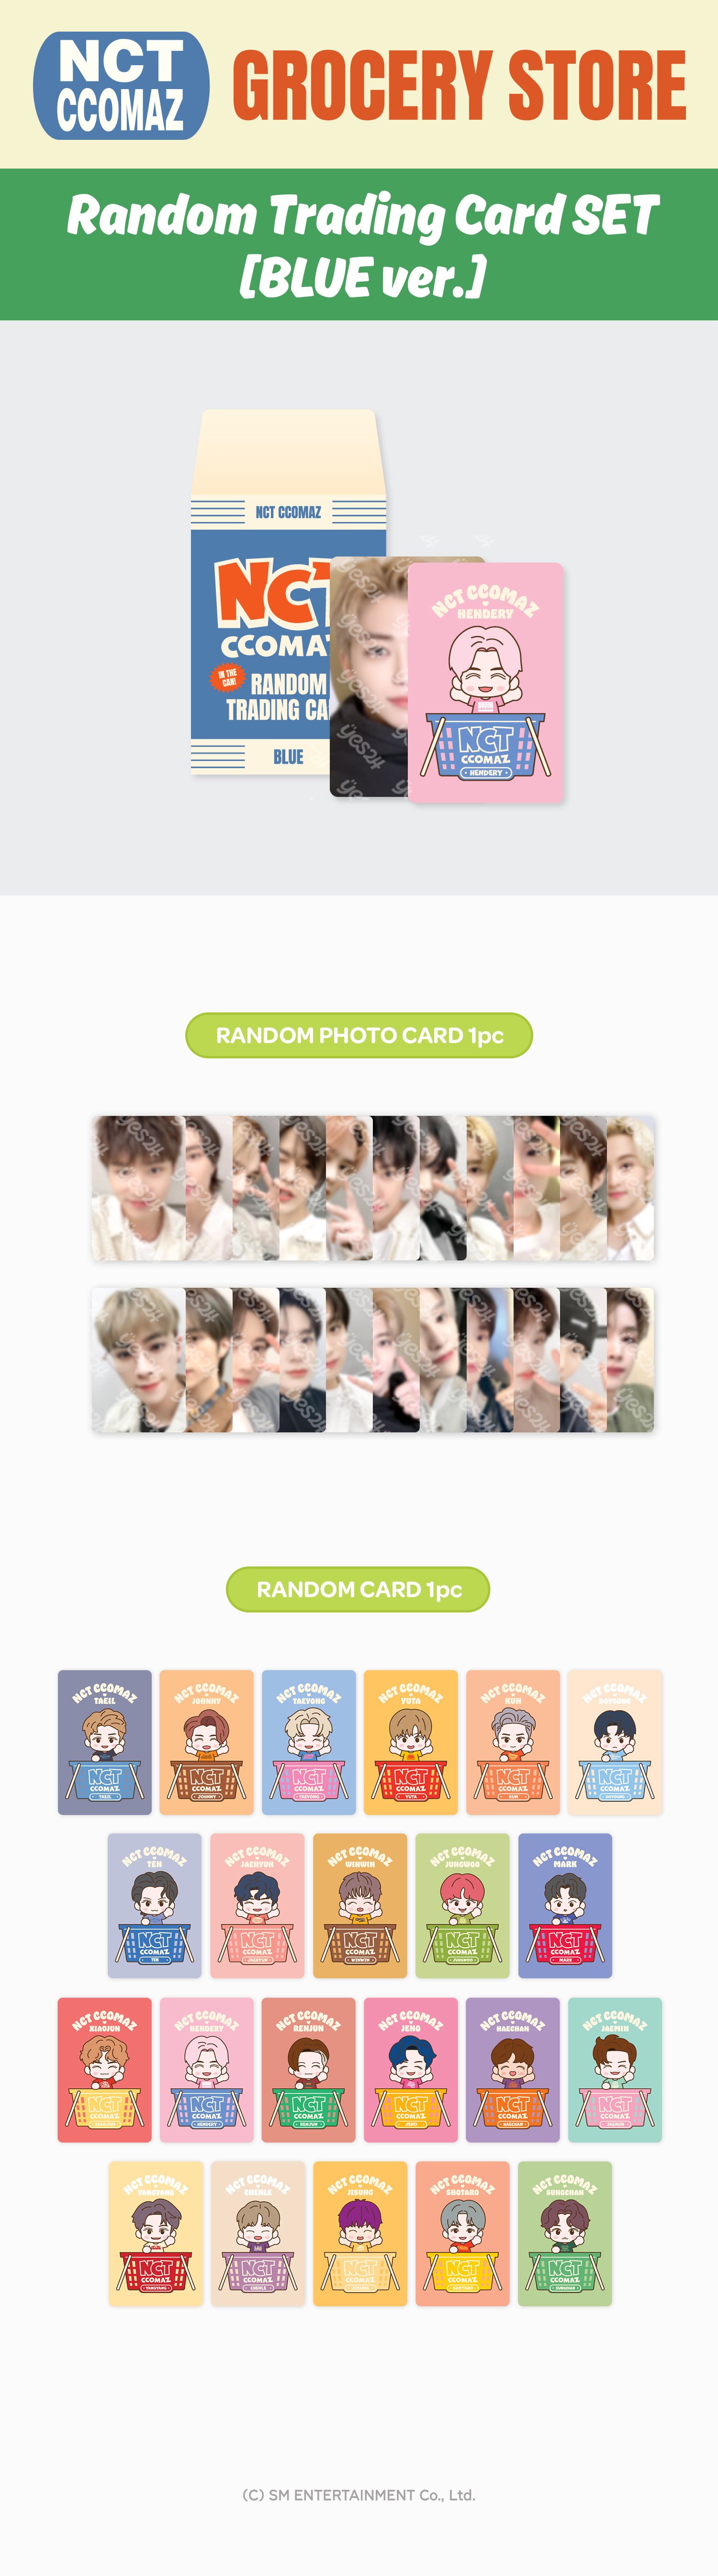 NCT CCOMAZ GROCERY STORE 2ND OFFICIAL MD - RANDOM TRADING CARD SET (BLUE  VER.)